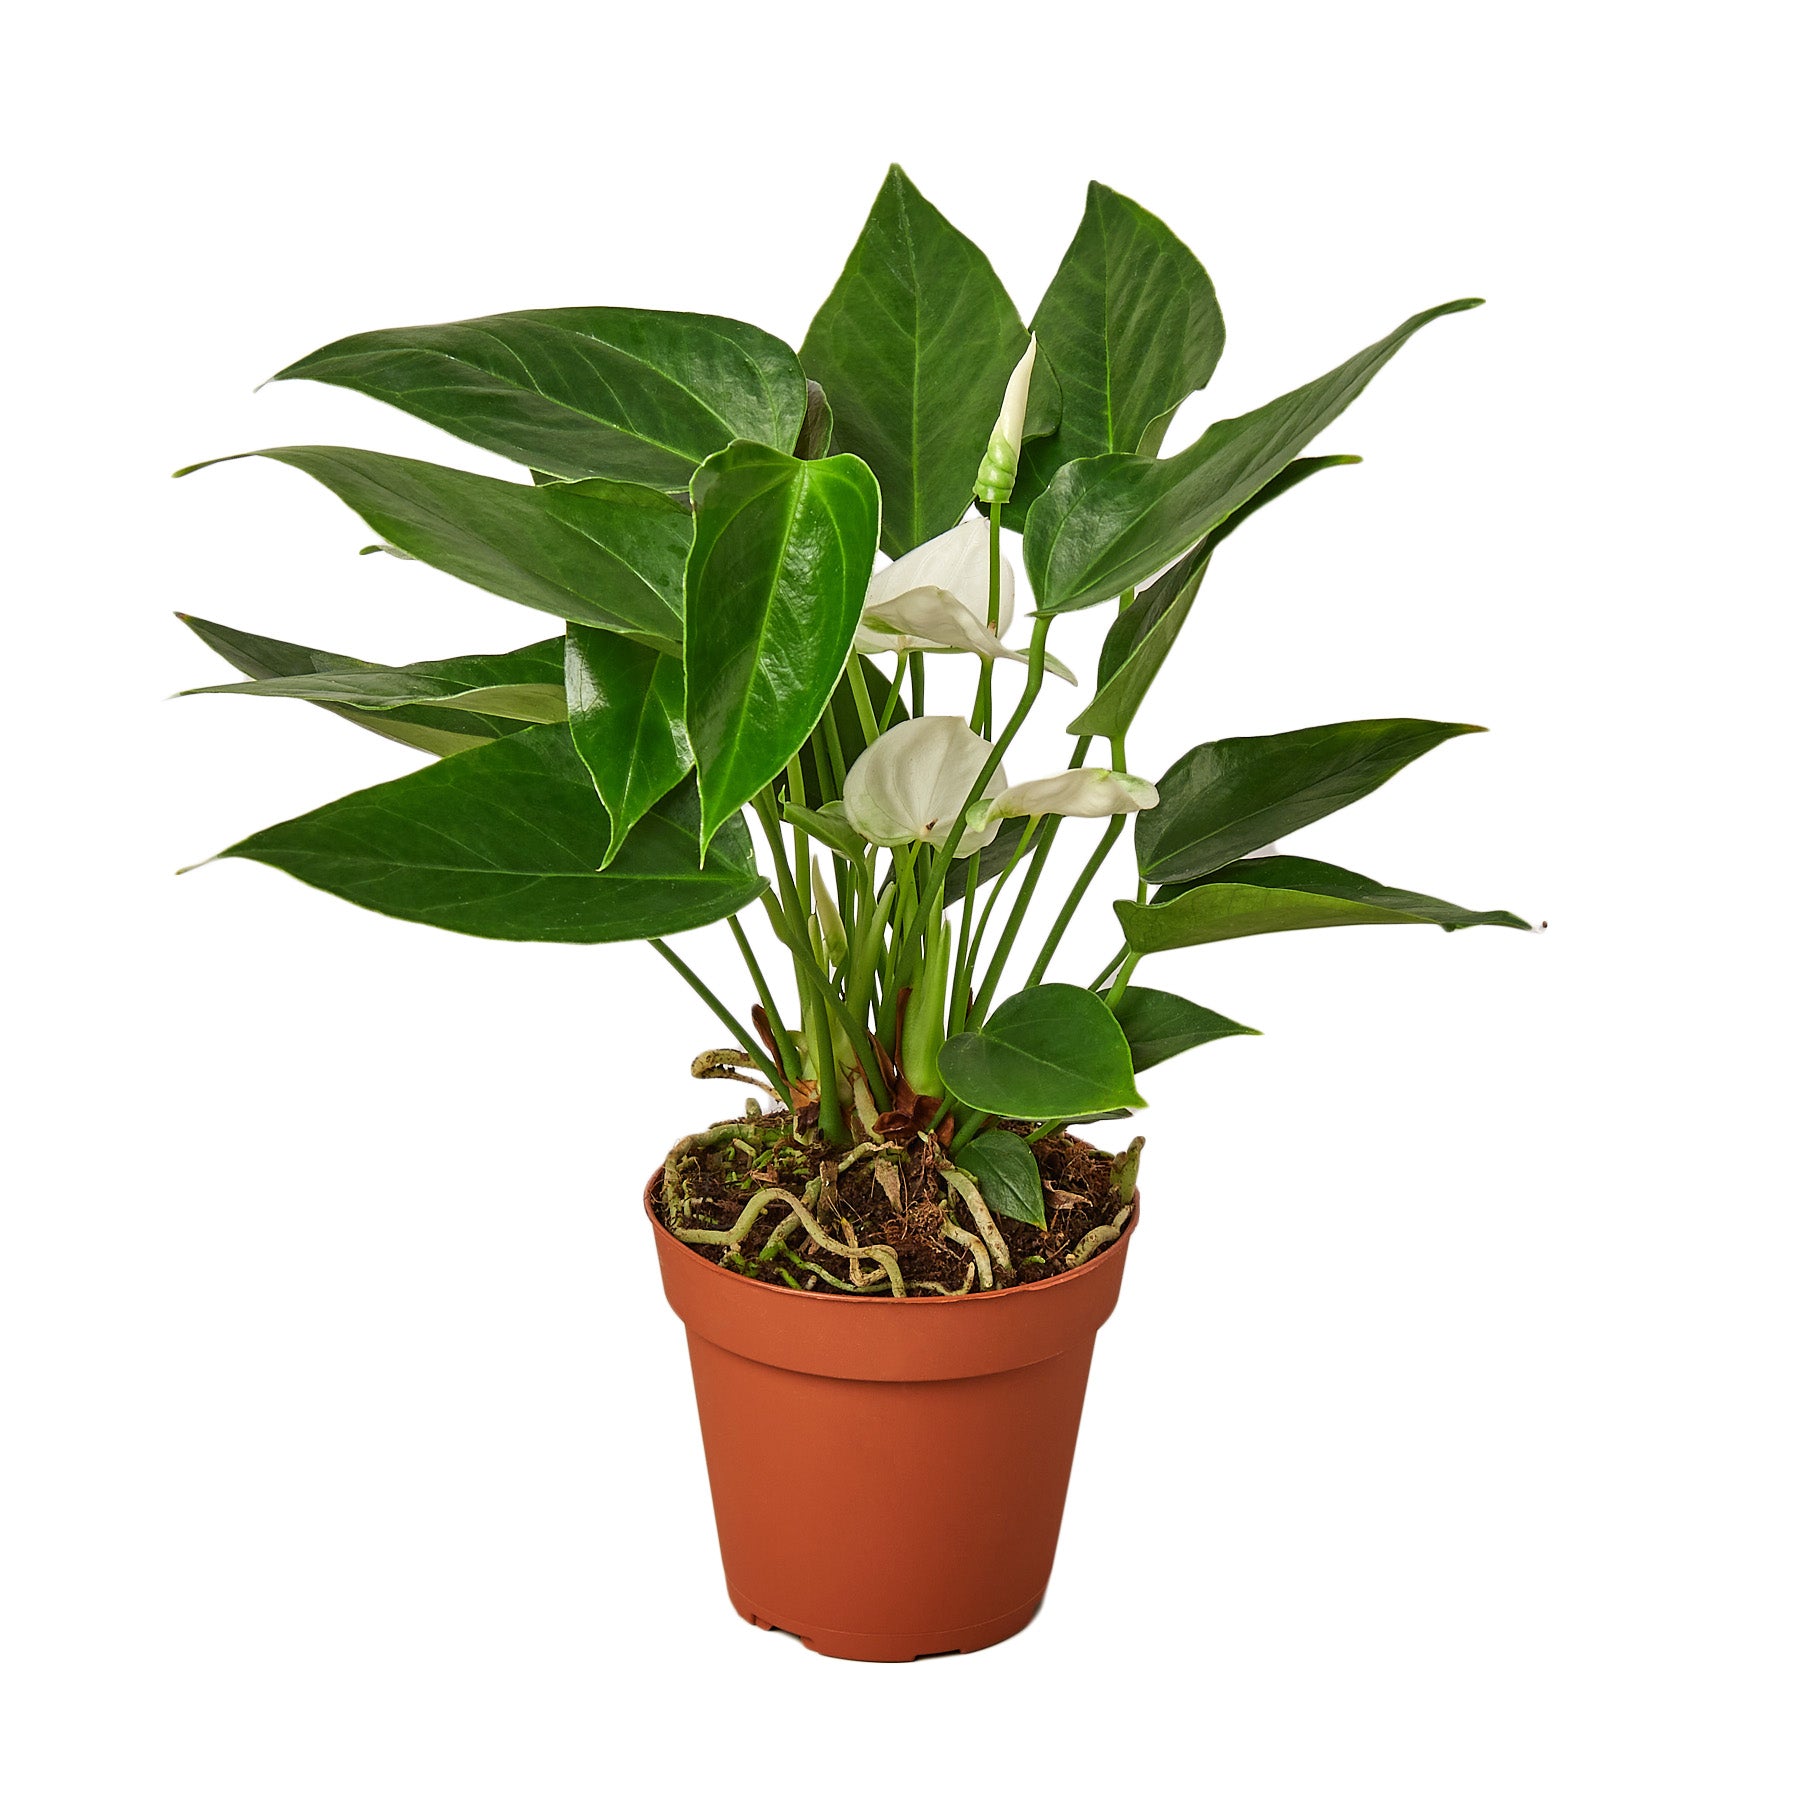 Peace lily in a pot on a white background, available at the best garden center near me.